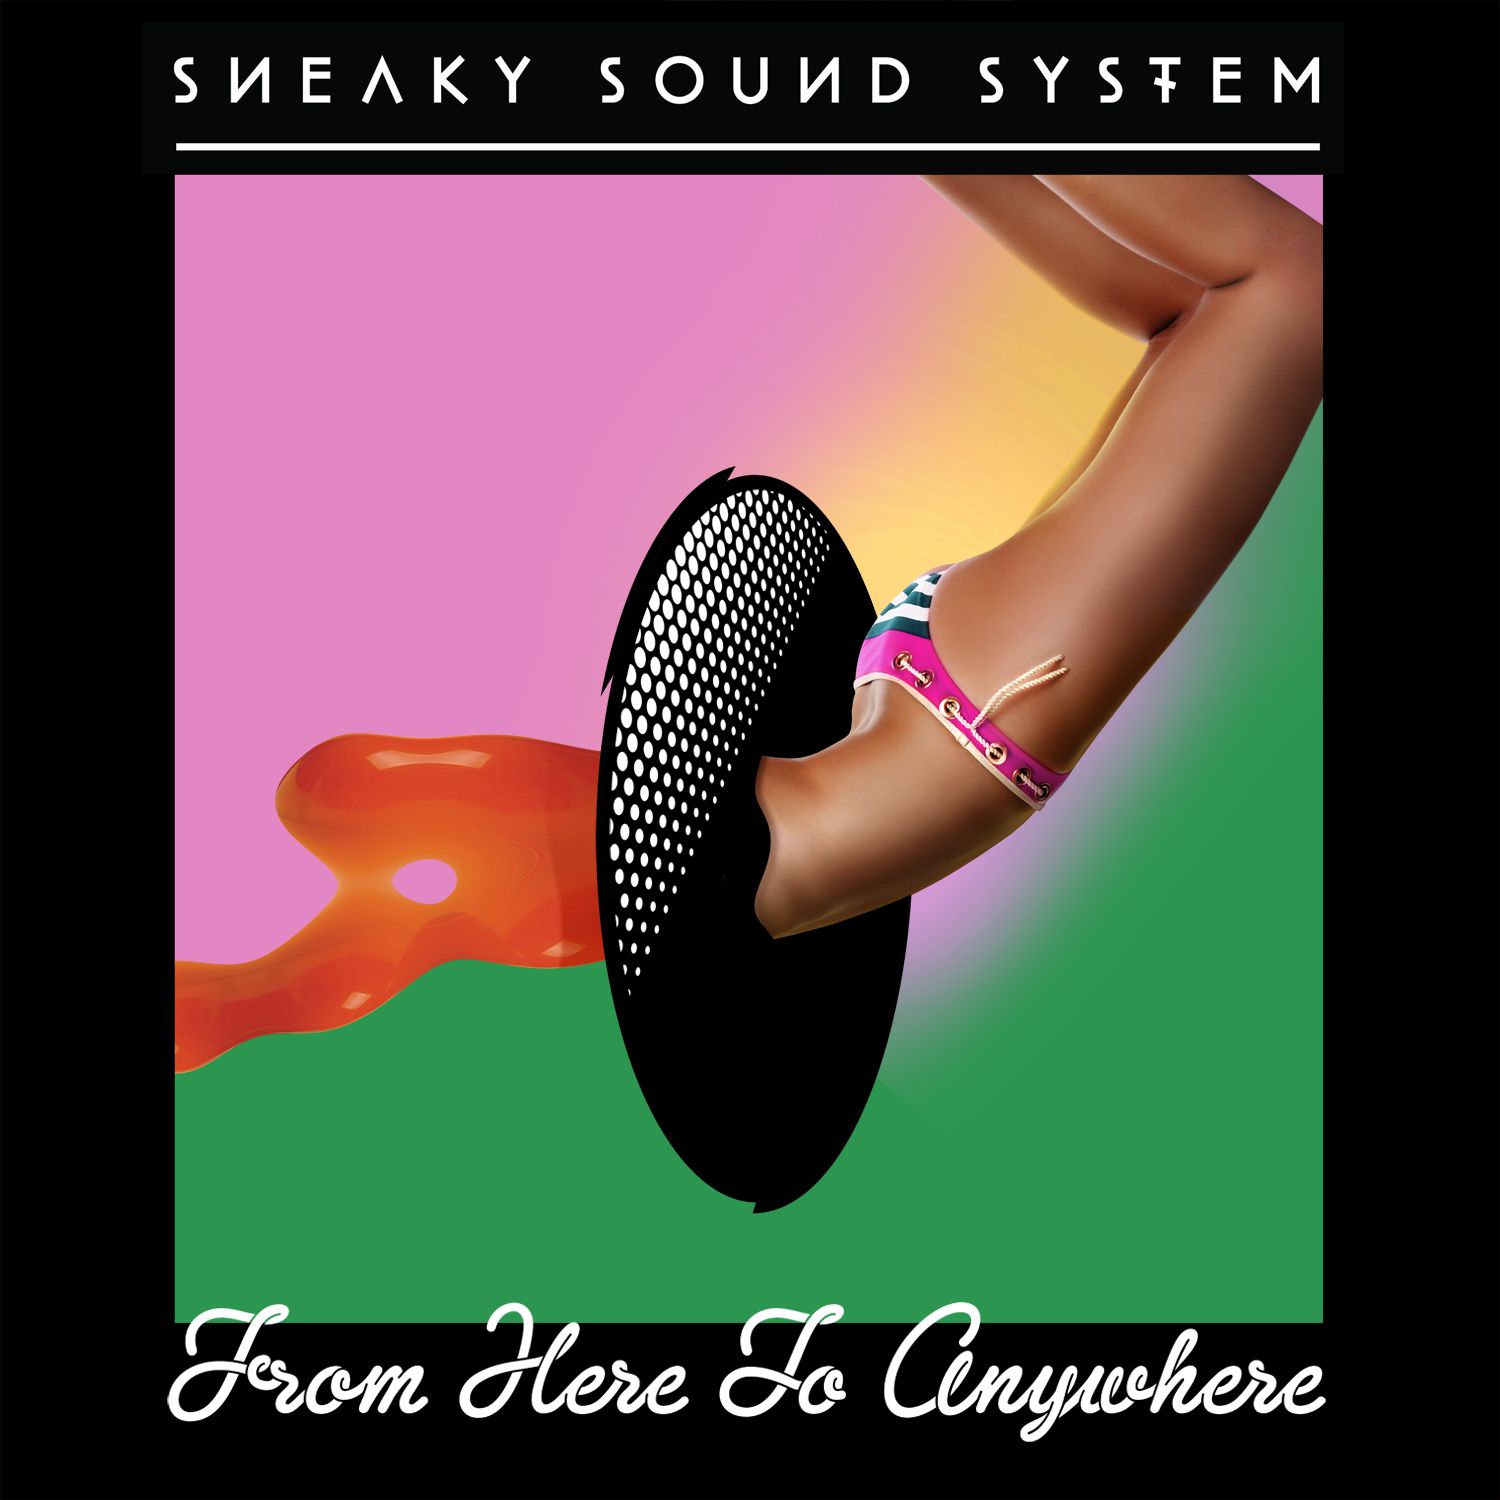 SNEAKY SOUND SYSTEM